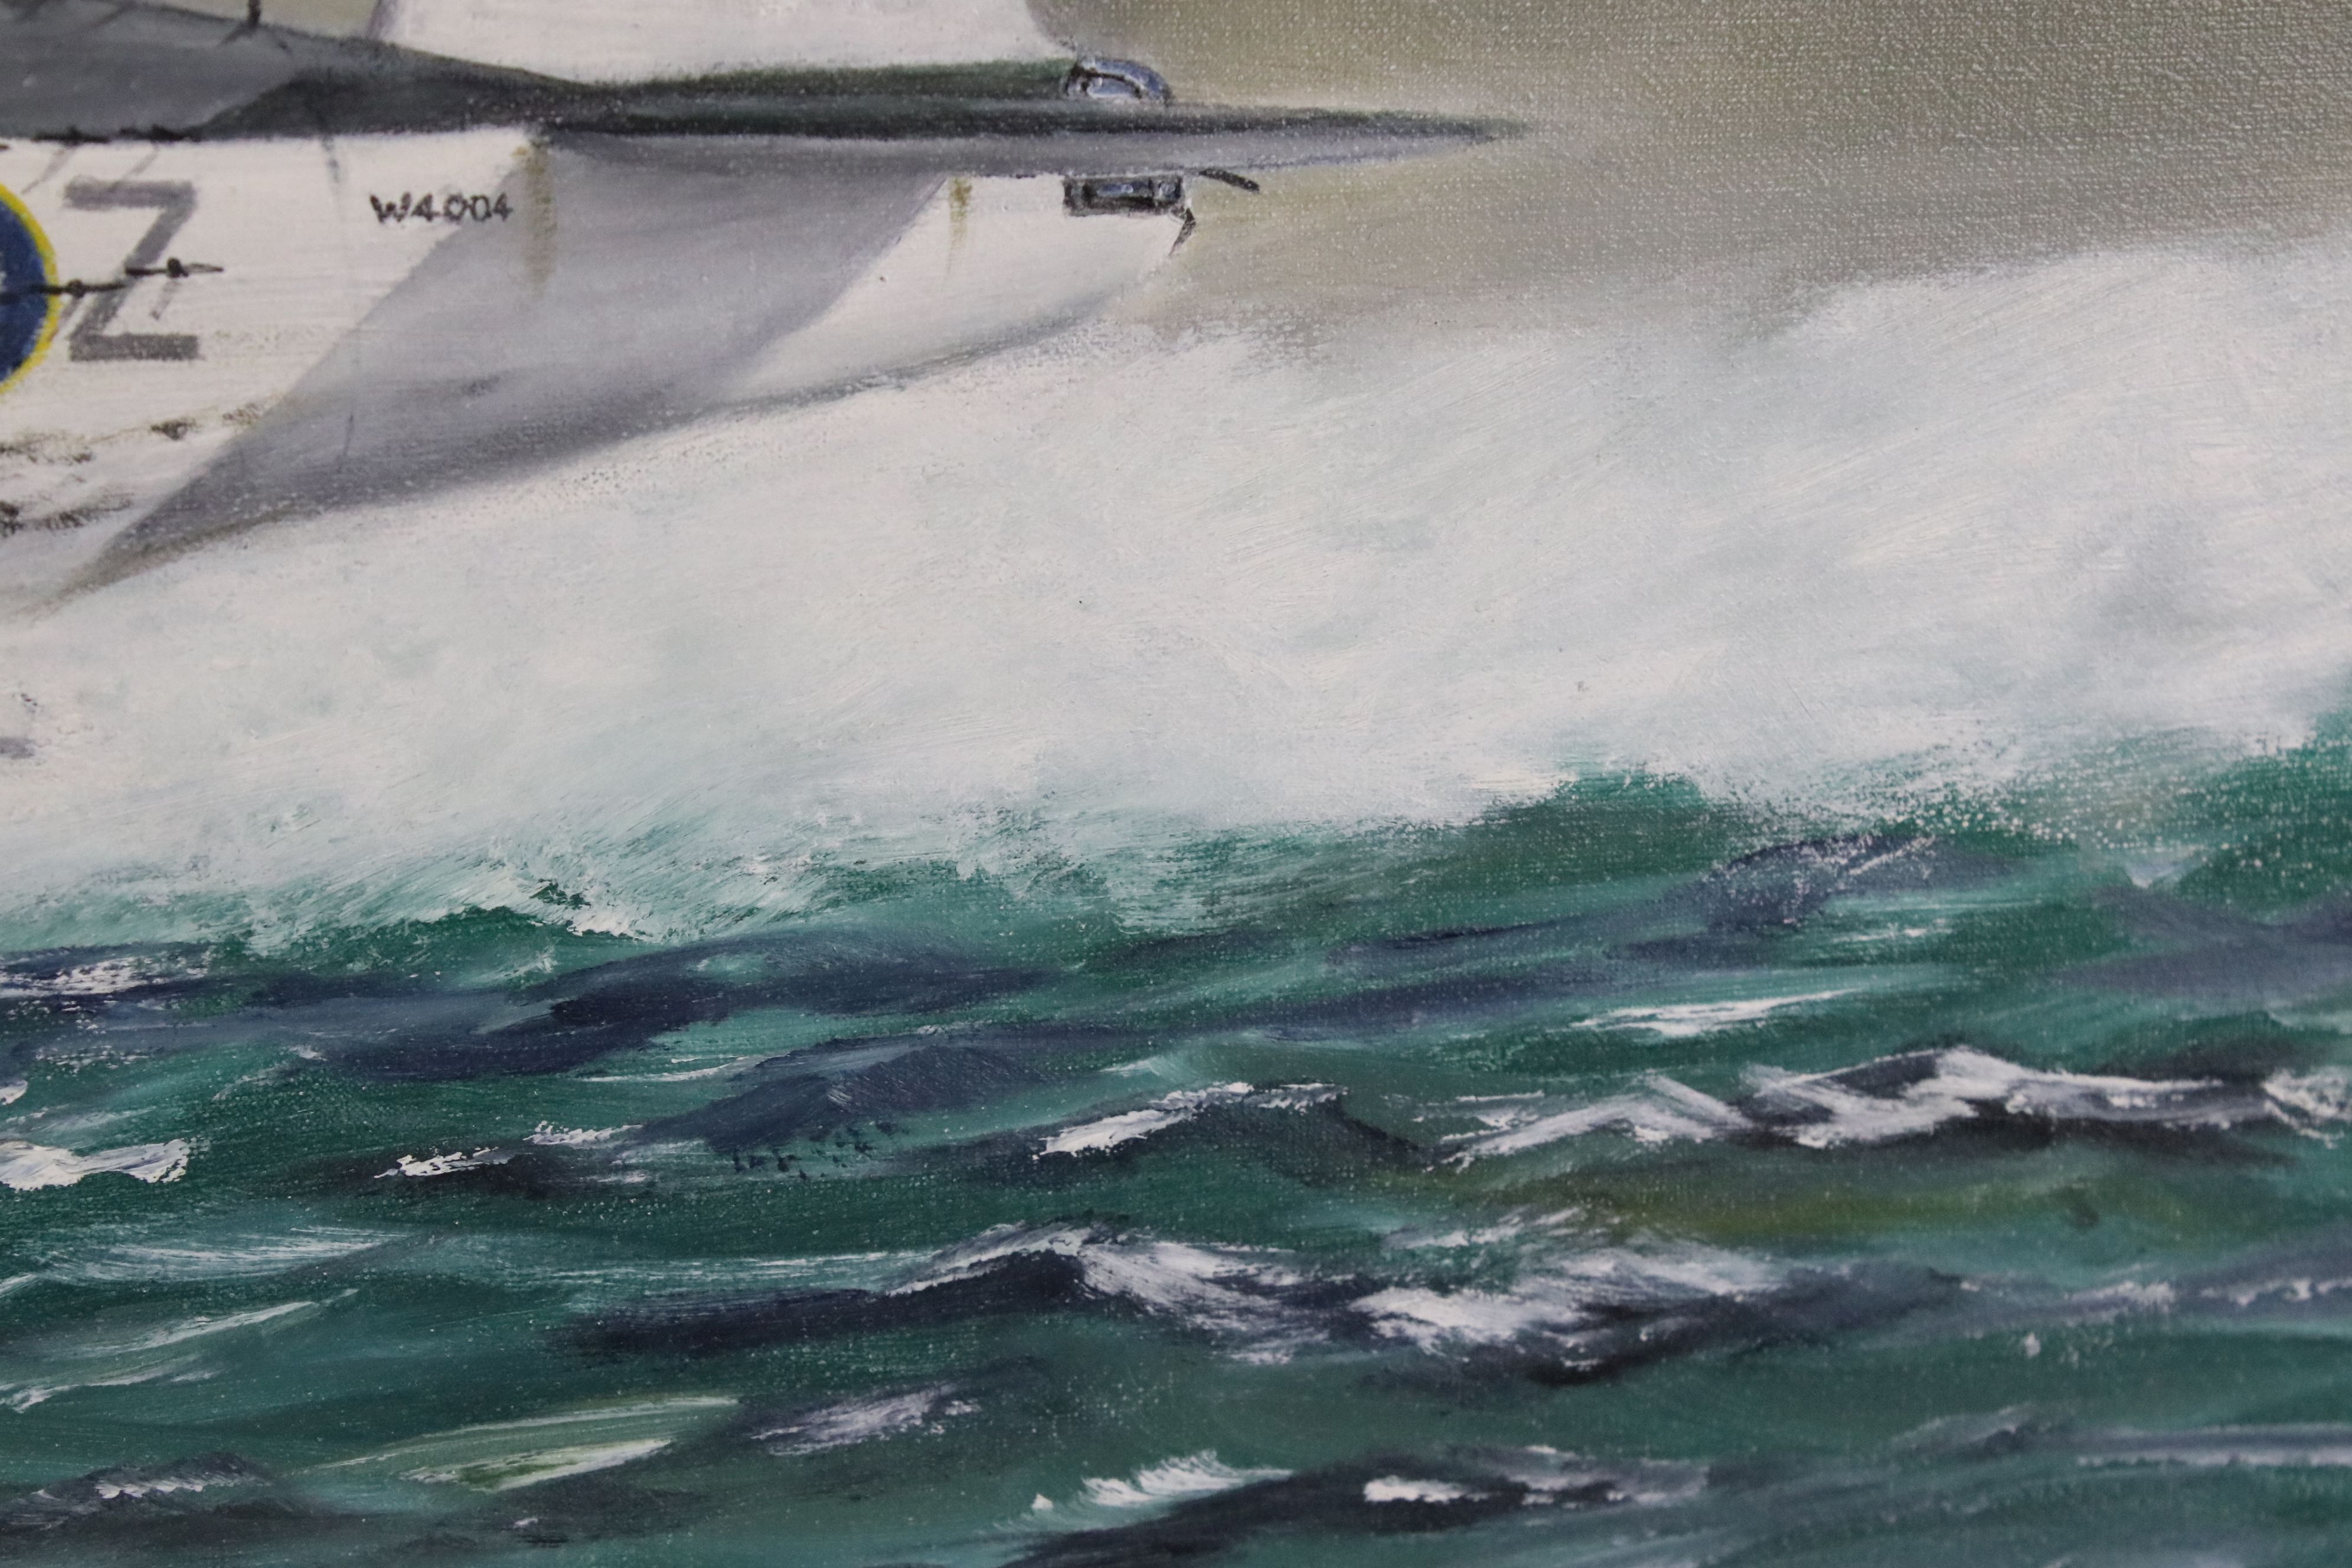 John Brooks (20th century) Oil Painting on Canvas of a Sunderland Flying Boat, signed lower right, - Image 11 of 12